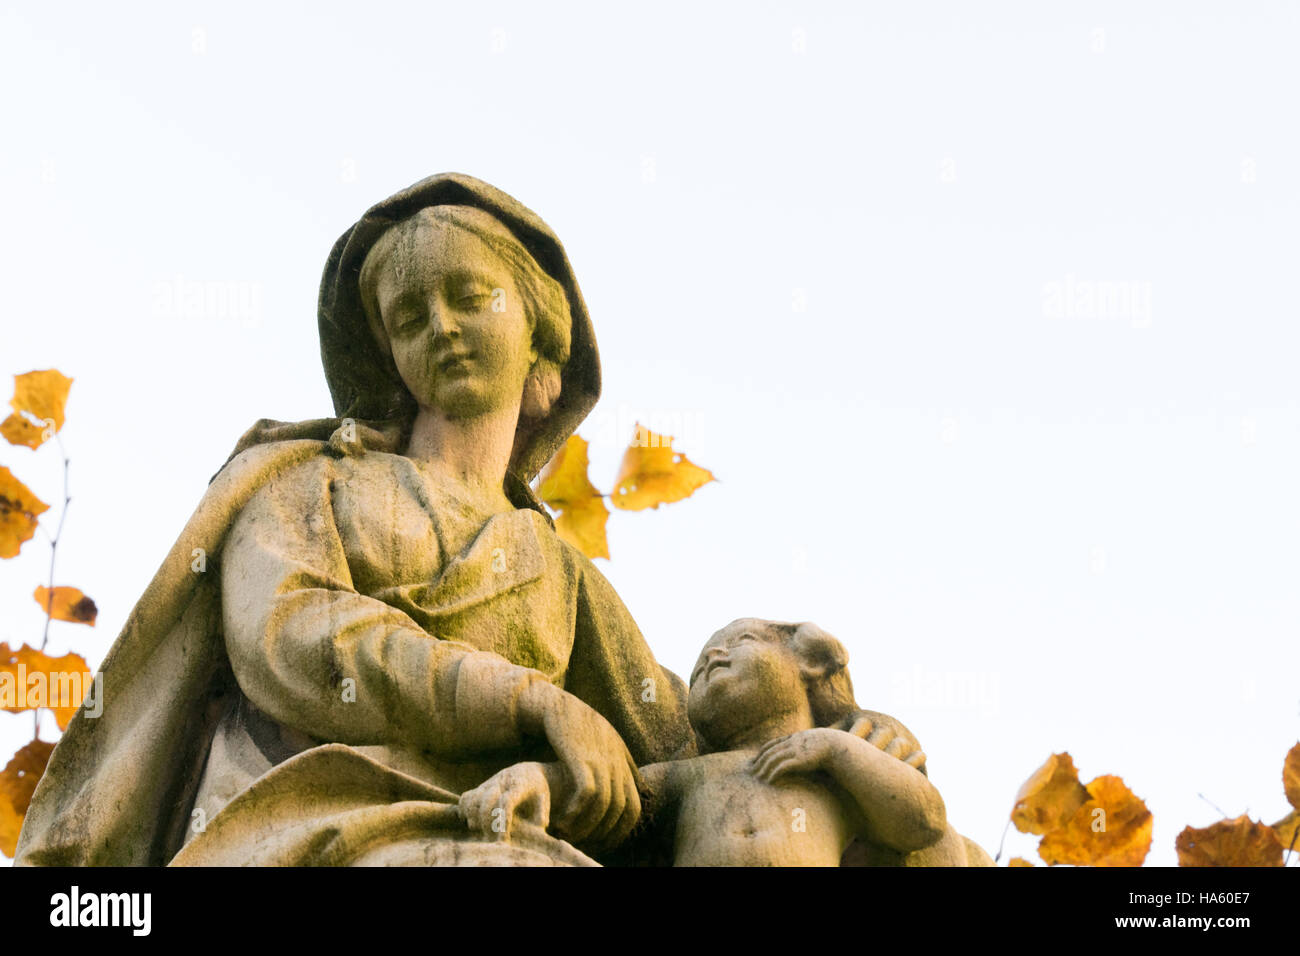 A stone statue of Madonna and Child outside the entrance to the Church of Our Lady, Bruges, Belgium. Stock Photo